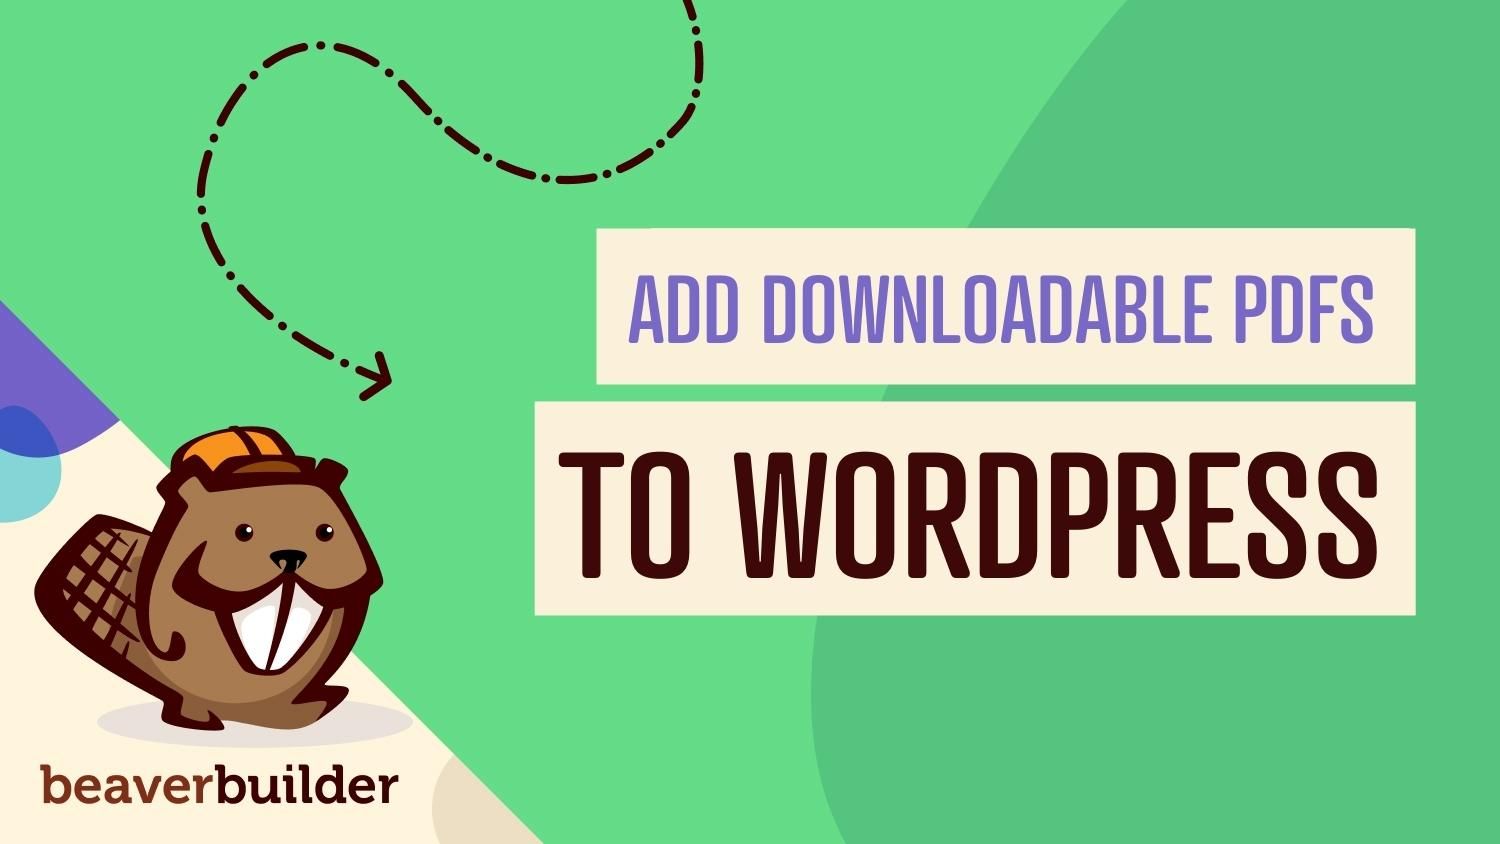 How to add downloadable PDFs to WordPress